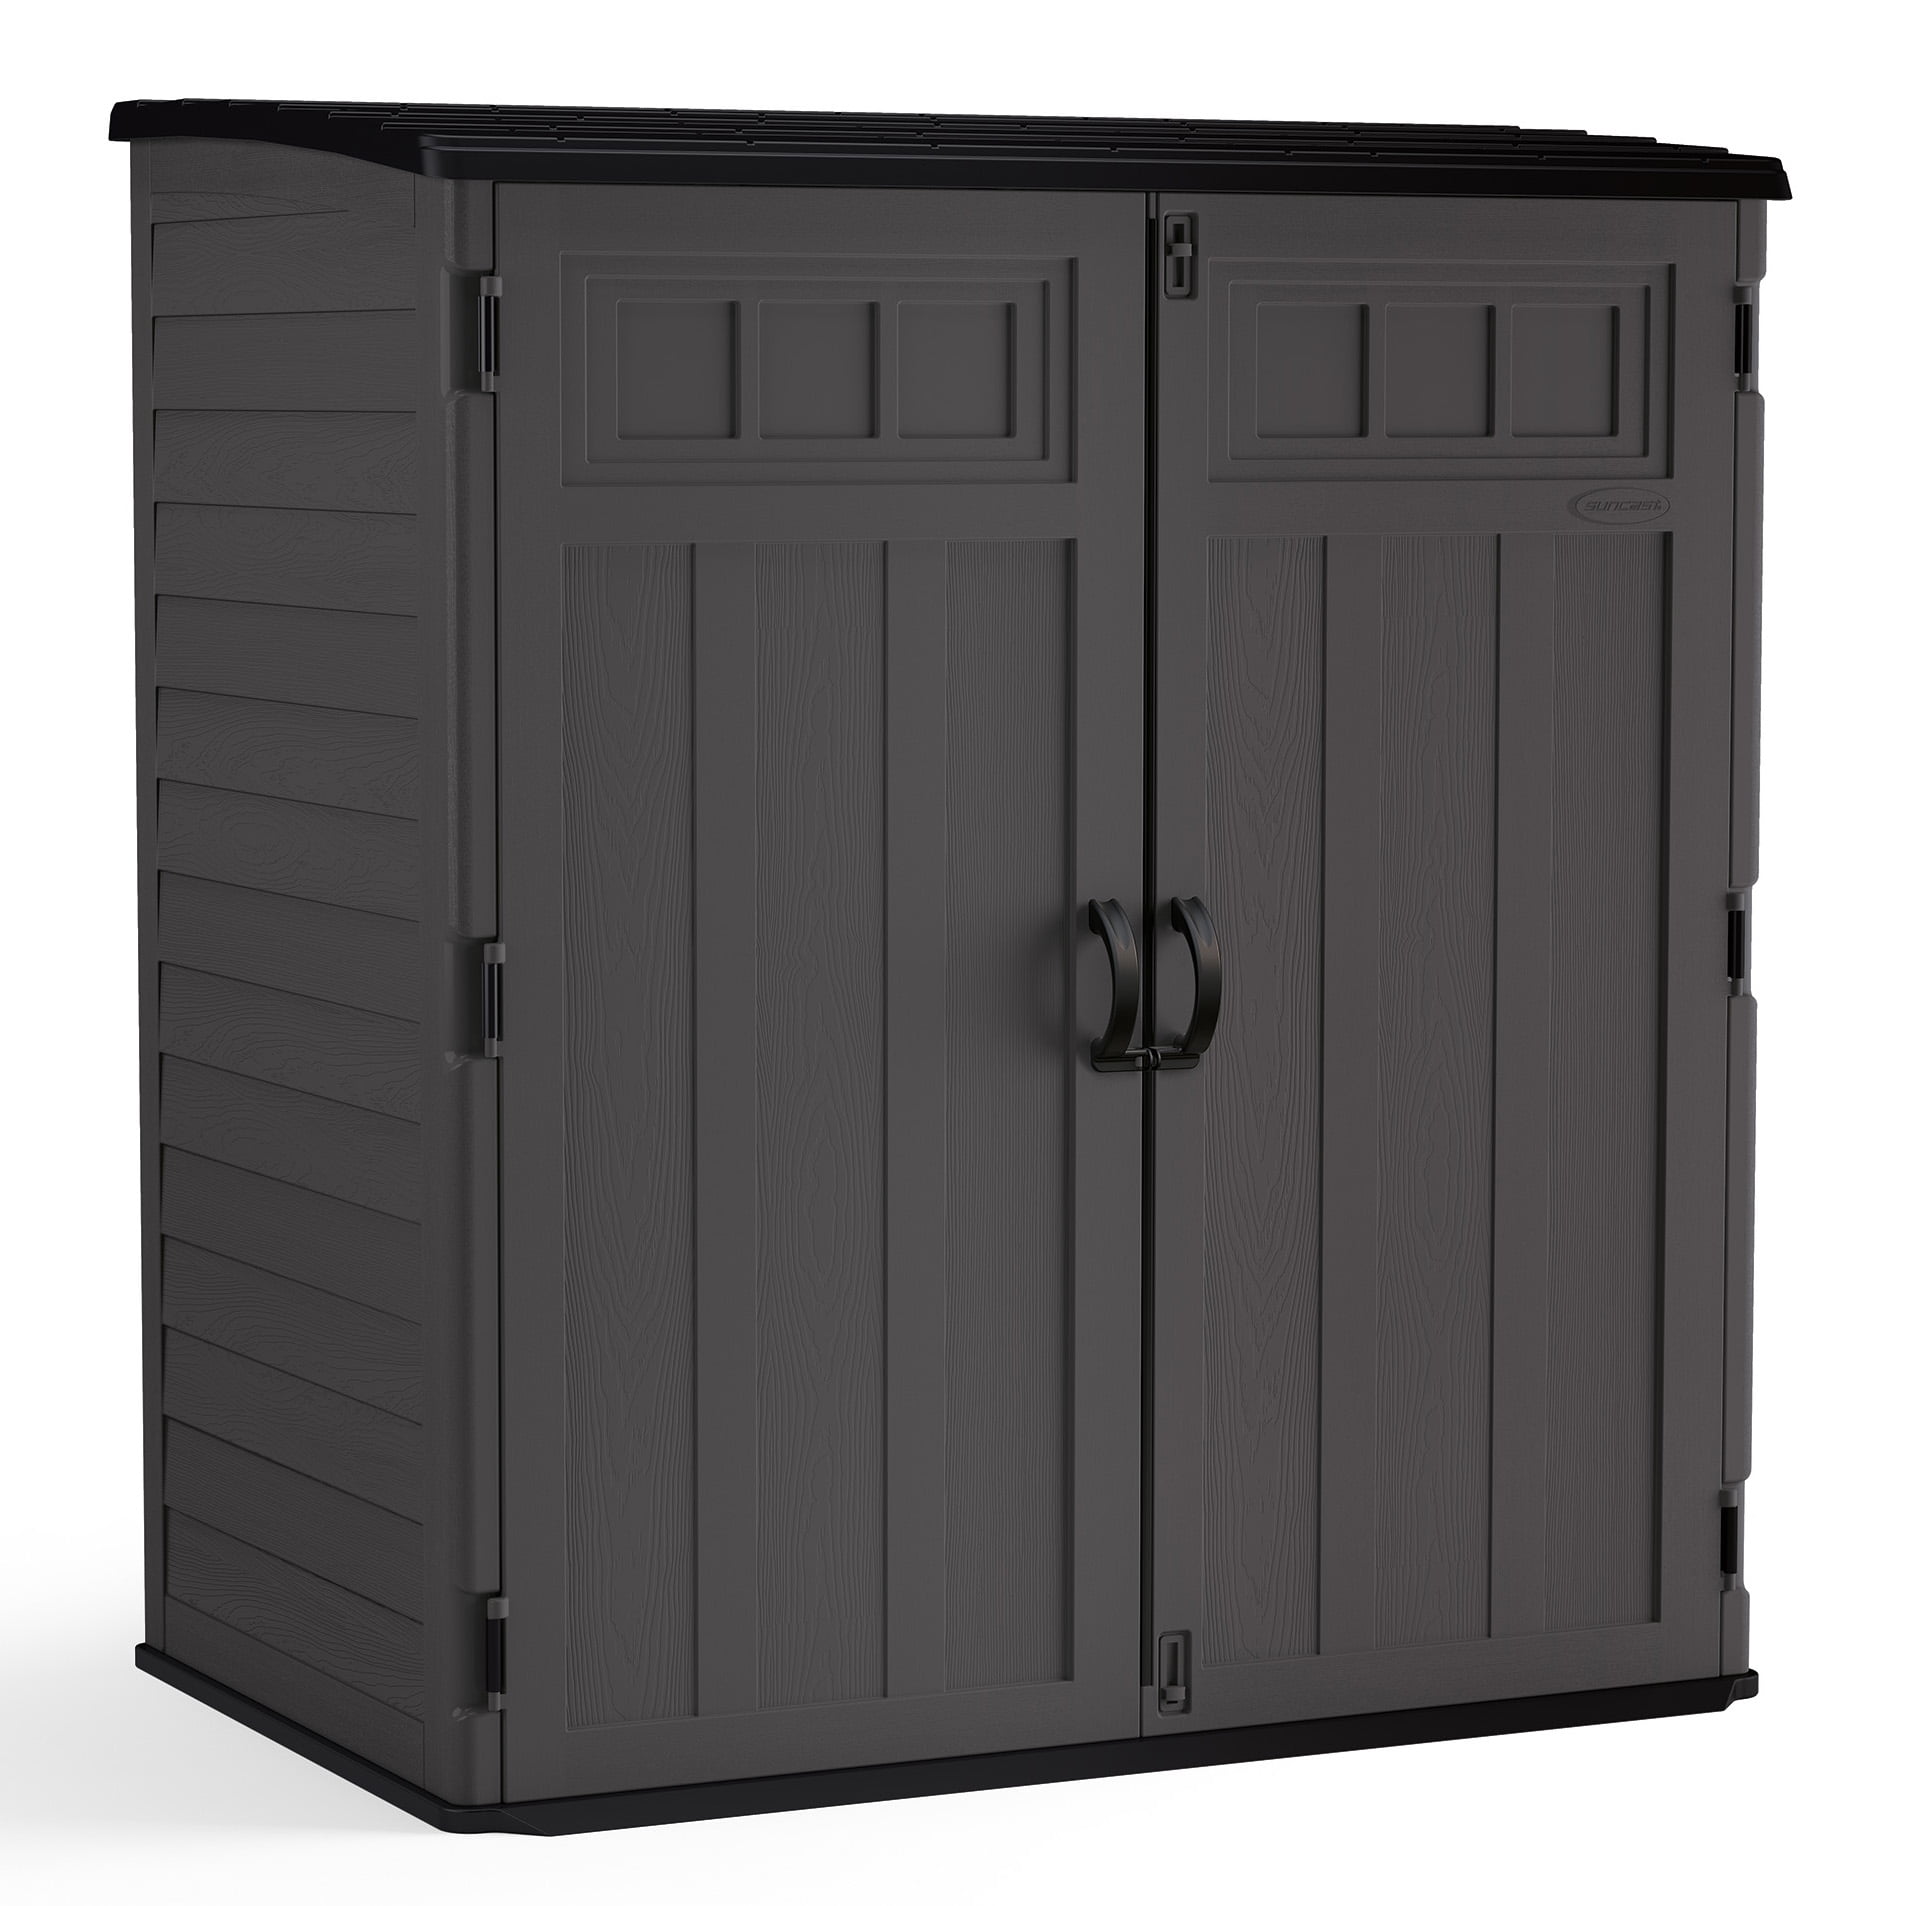 Suncast 106 cu. ft. Extra Large Vertical Outdoor Resin Storage Shed ...